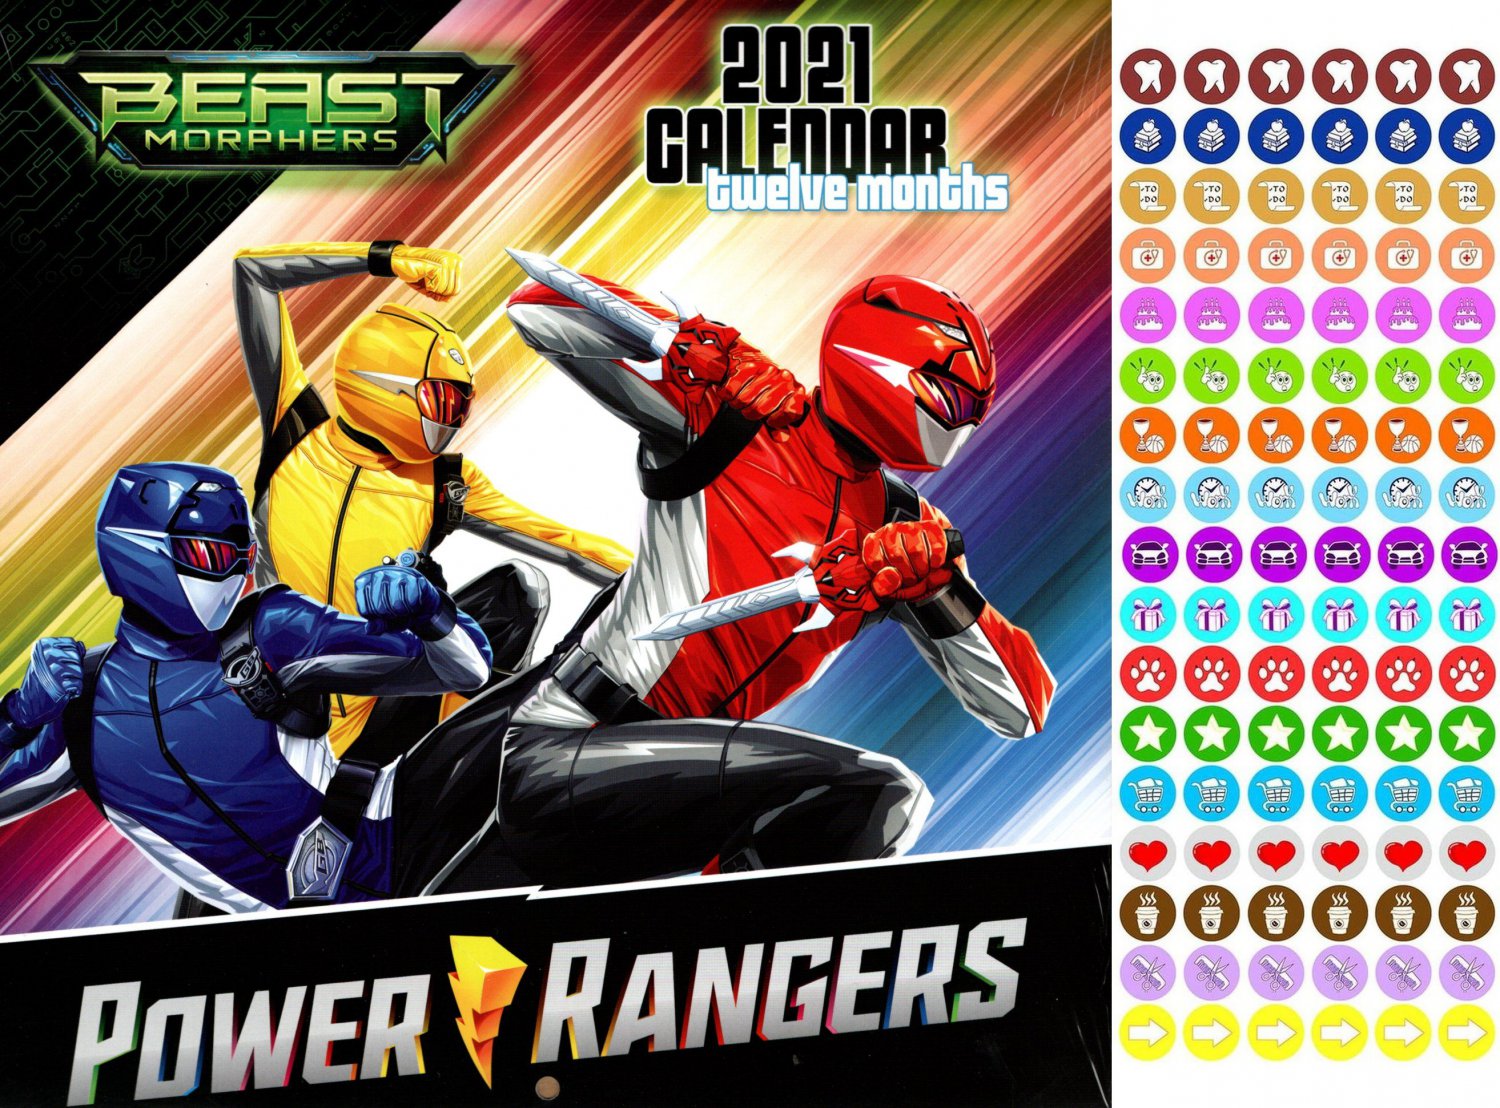 Power Rangers 12 Month 2021 Wall Calendar With 100 Reminder Stickers